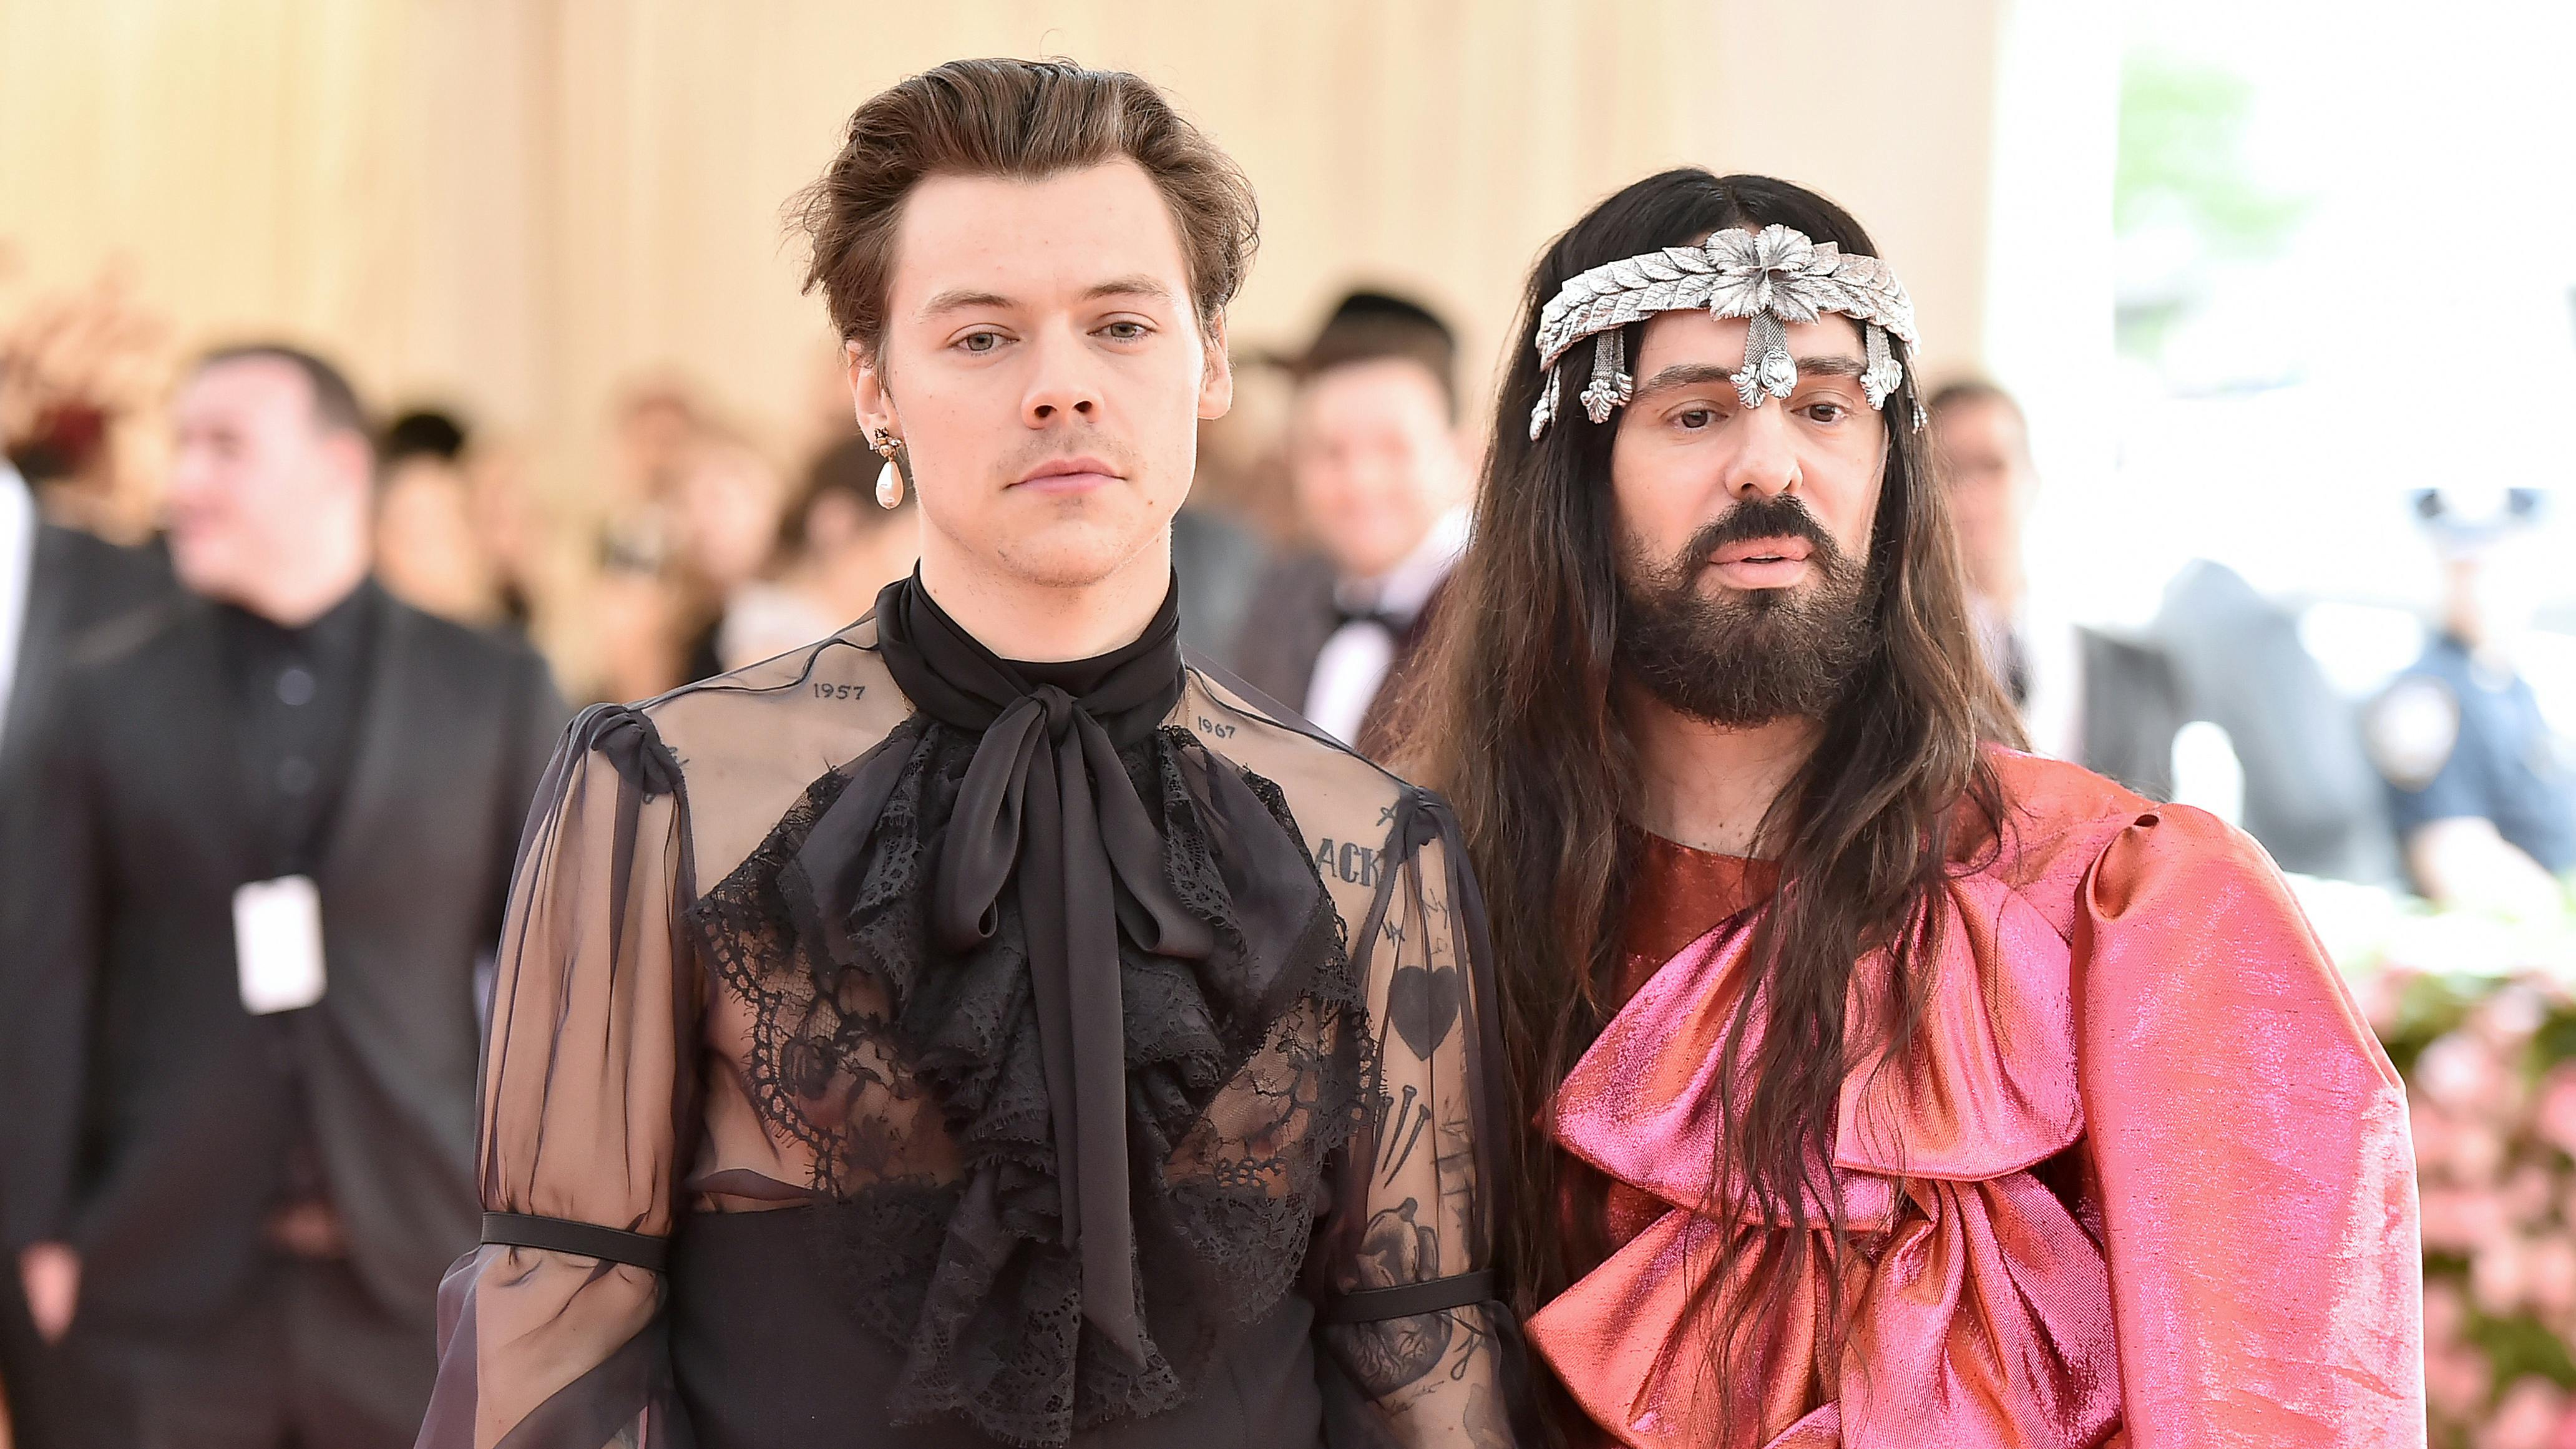 Harry Styles and Alessandro Michele attend The 2019 Met Gala Celebrating Camp: Notes on Fashion at Metropolitan Museum of Art on May 06, 2019 in New York City.